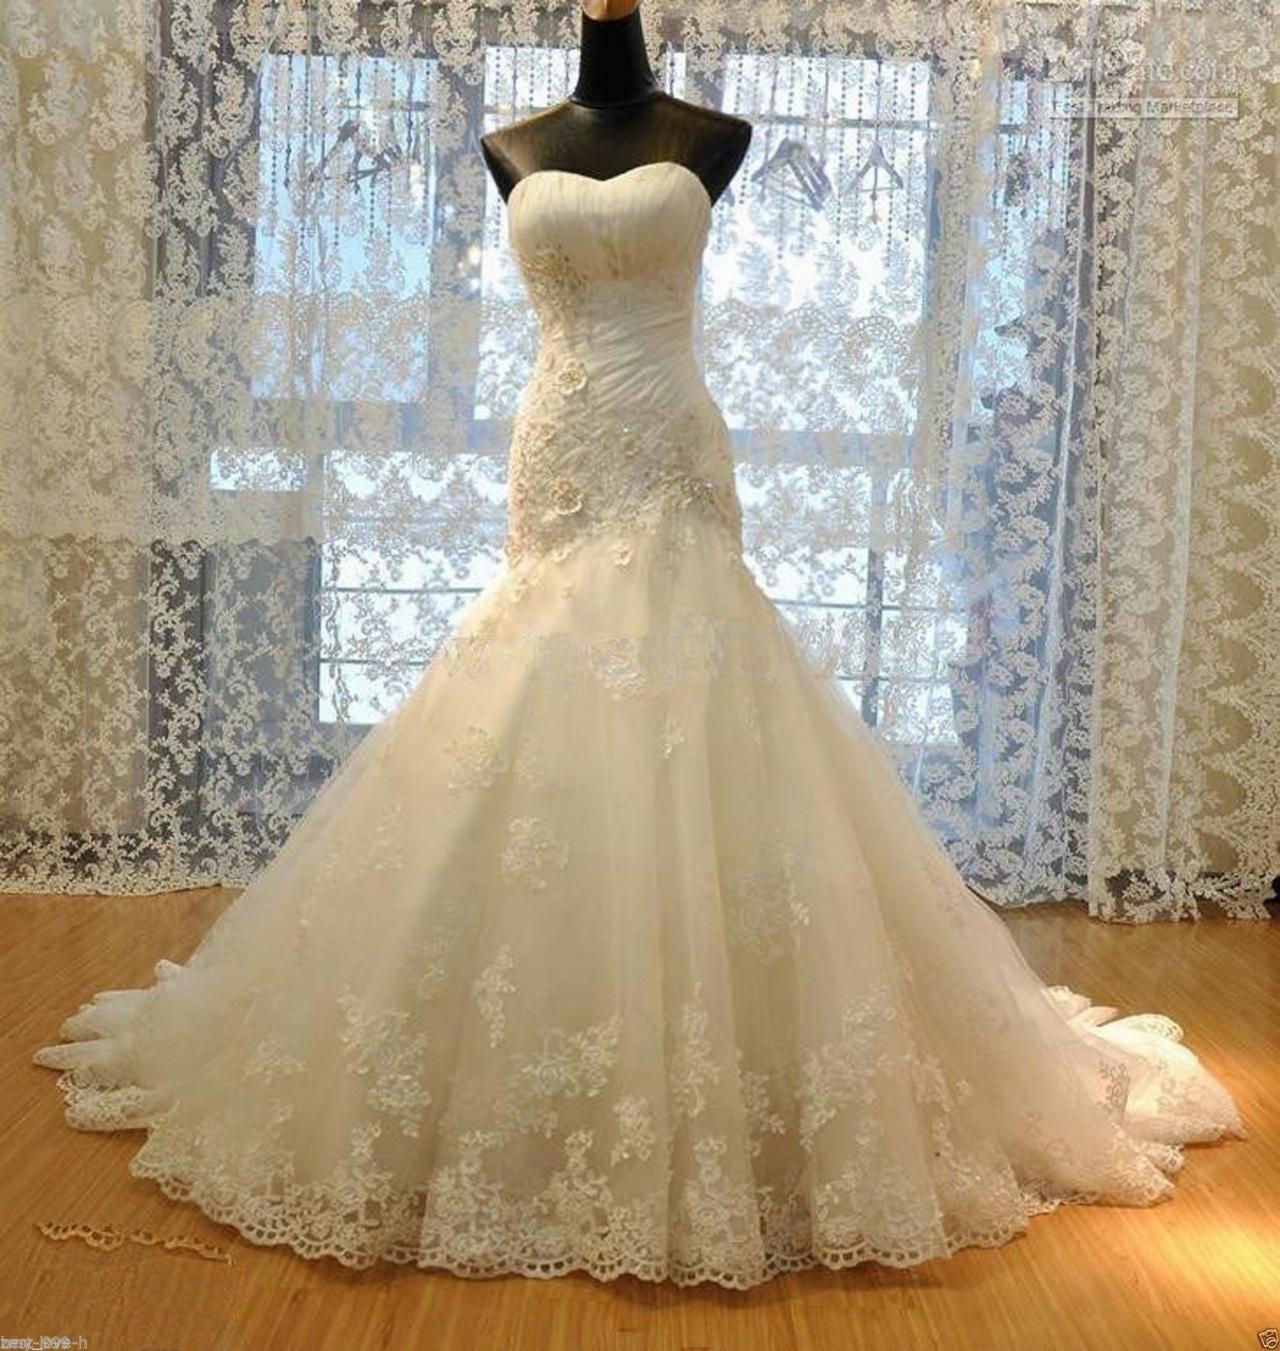 White/ivory Lace Strapless Applique Full Length Wedding Dress Bridal Gown L14